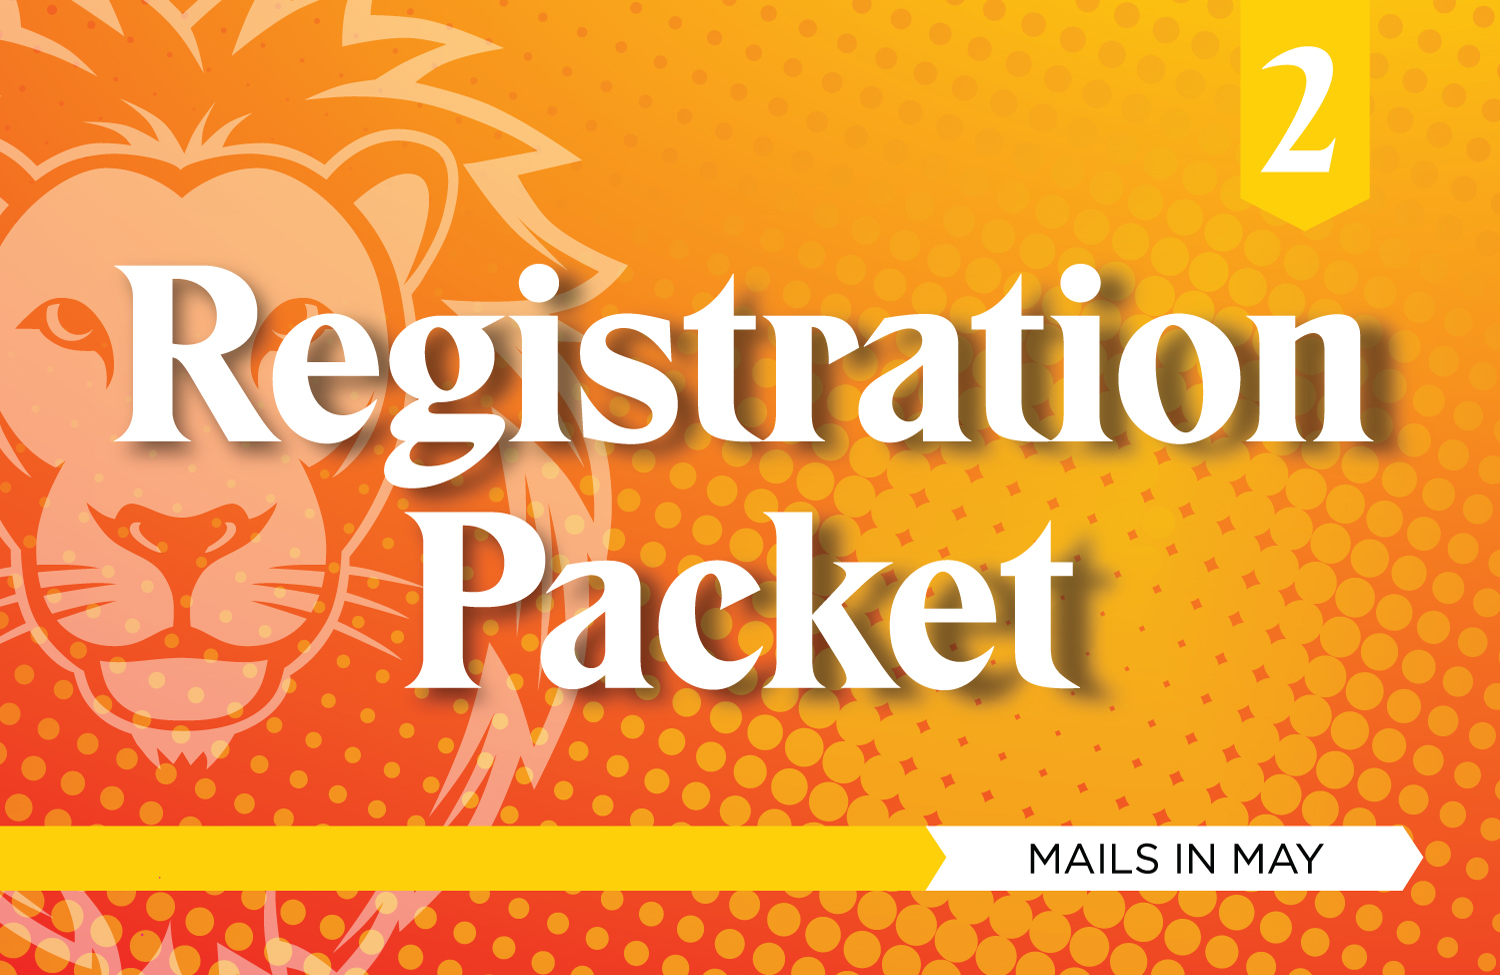 Mailing 2: Registration Packet, mails in May